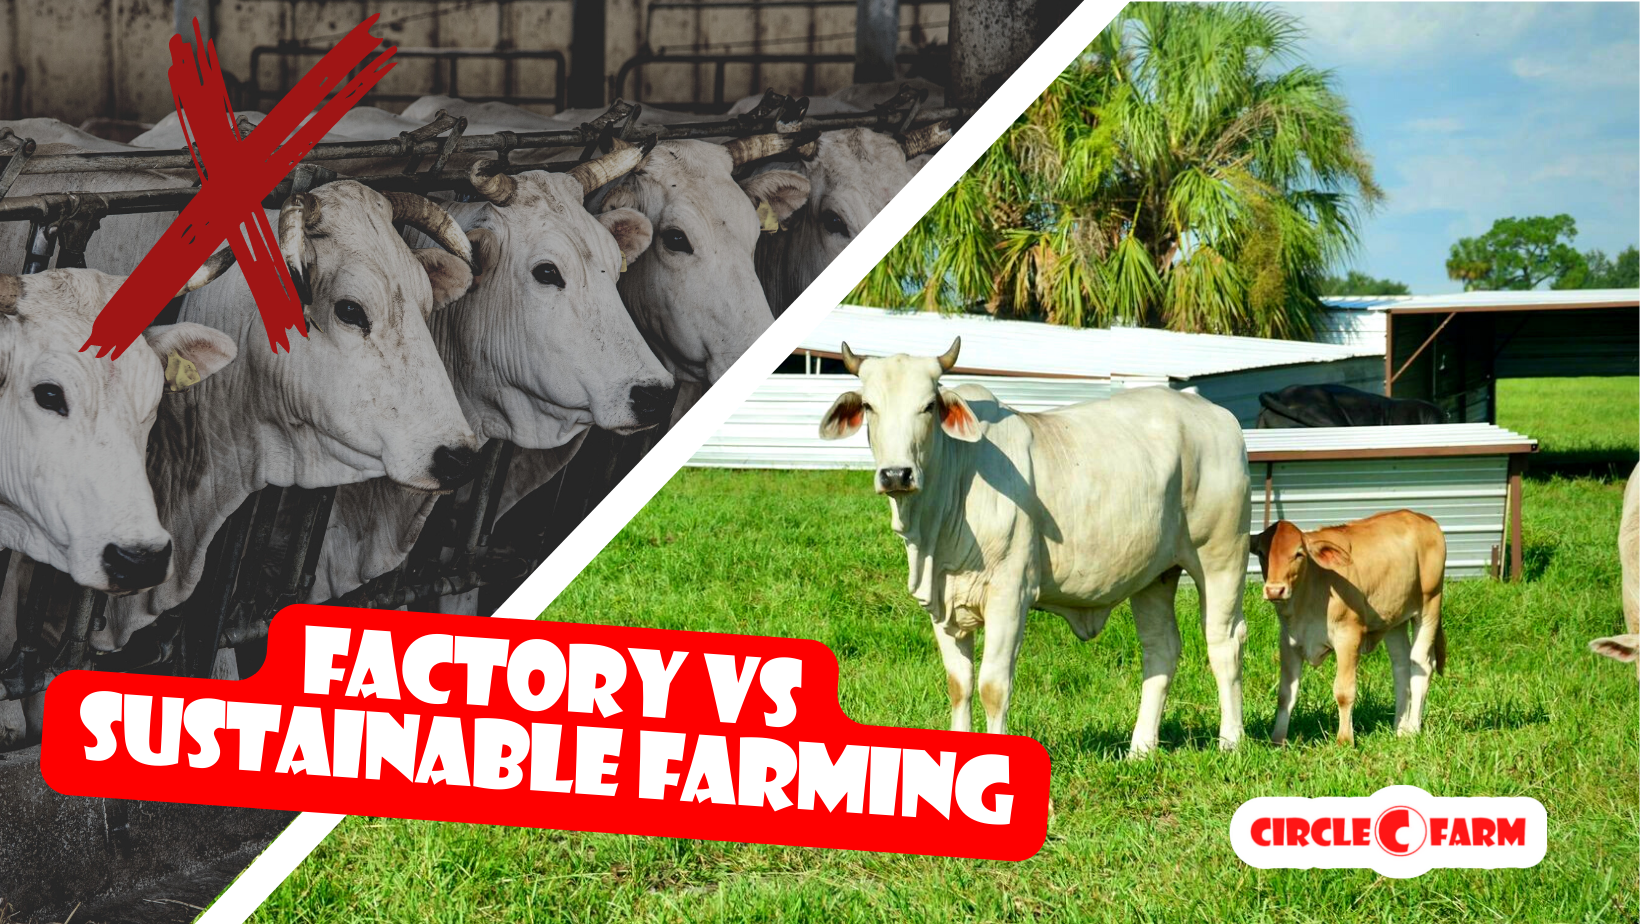 The environmental impact of factory farming compared to small-scale, sustainable agriculture